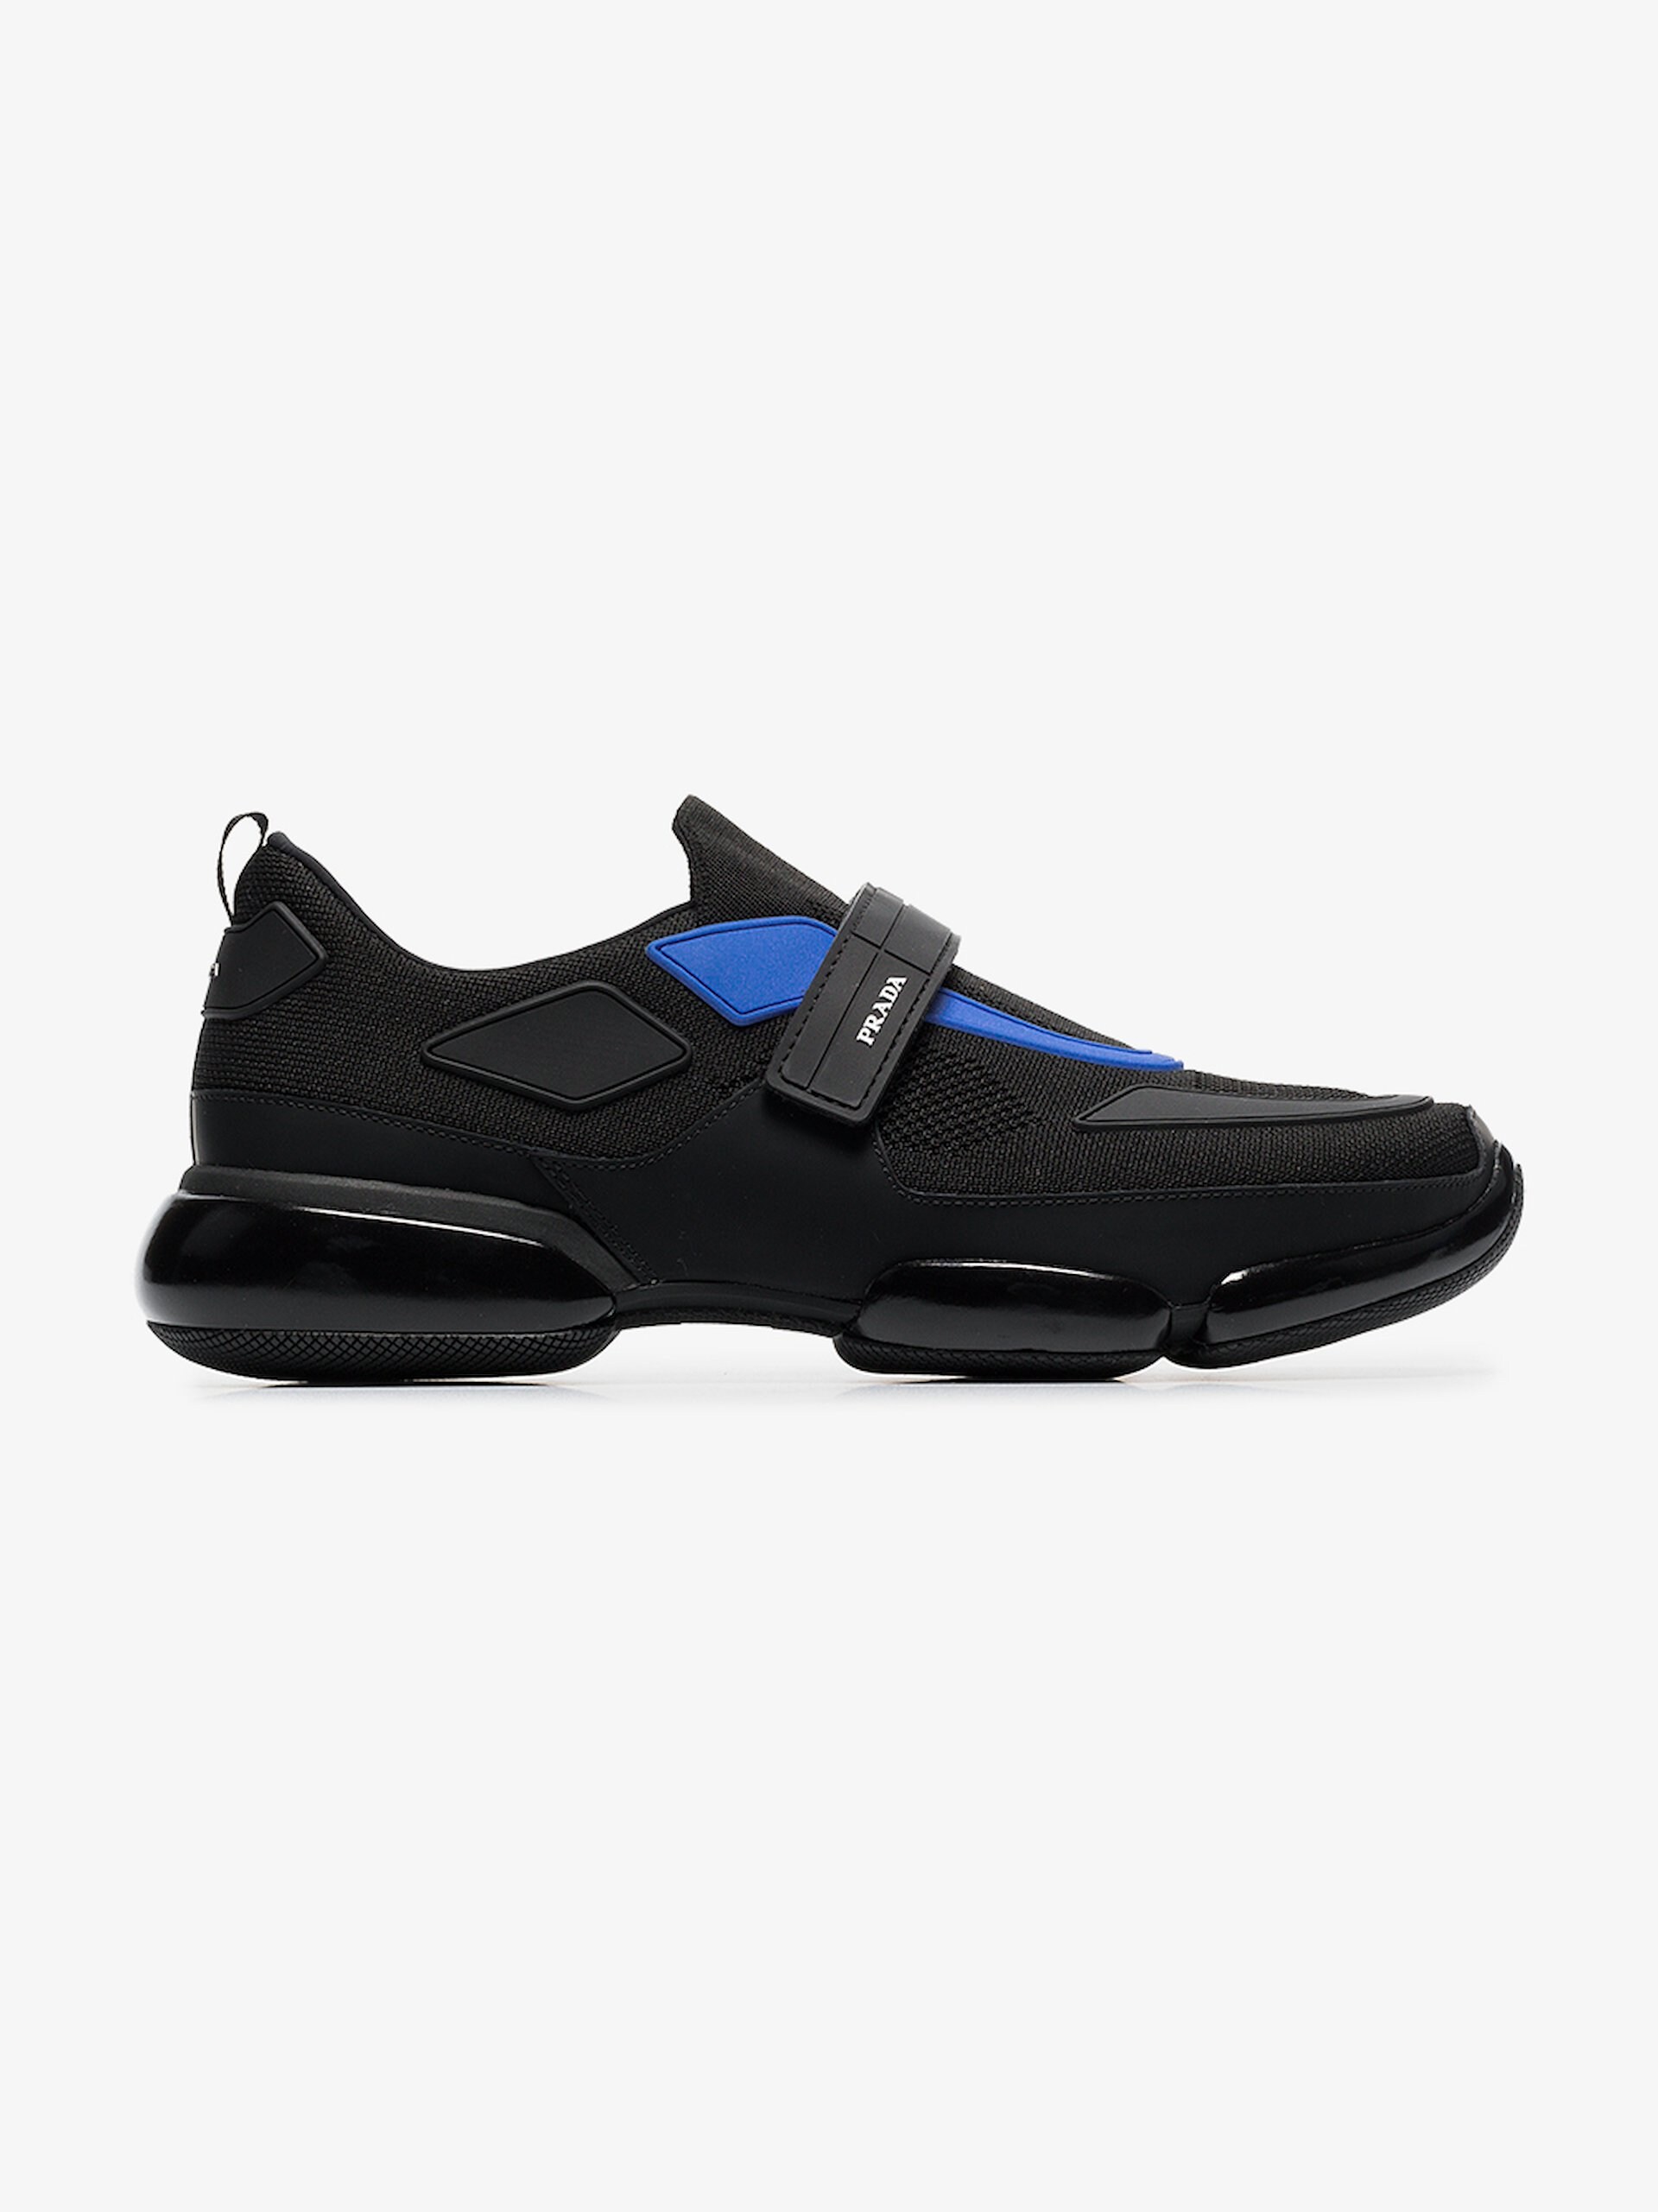 Prada black and blue Cloudbust leather sneakers | Browns